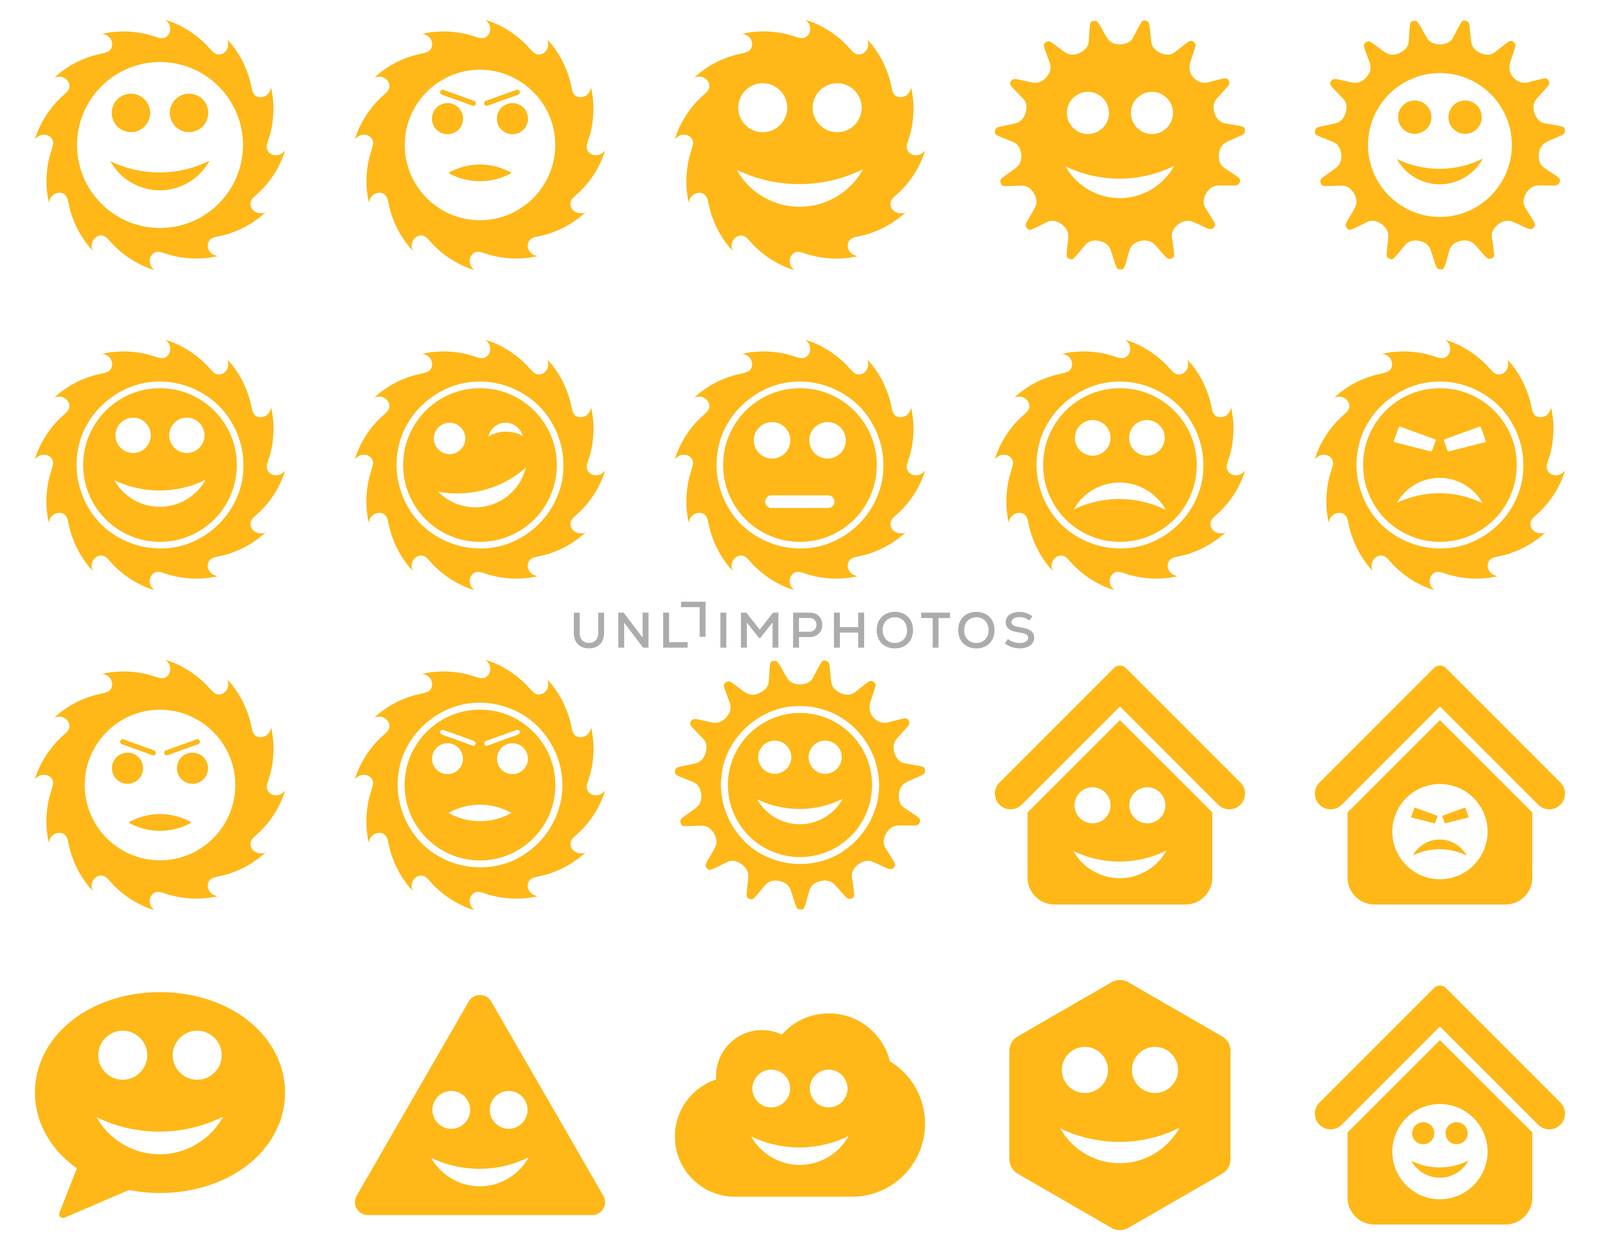 Tools, gears, smiles, emotions icons. Glyph set style is flat images, yellow symbols, isolated on a white background.